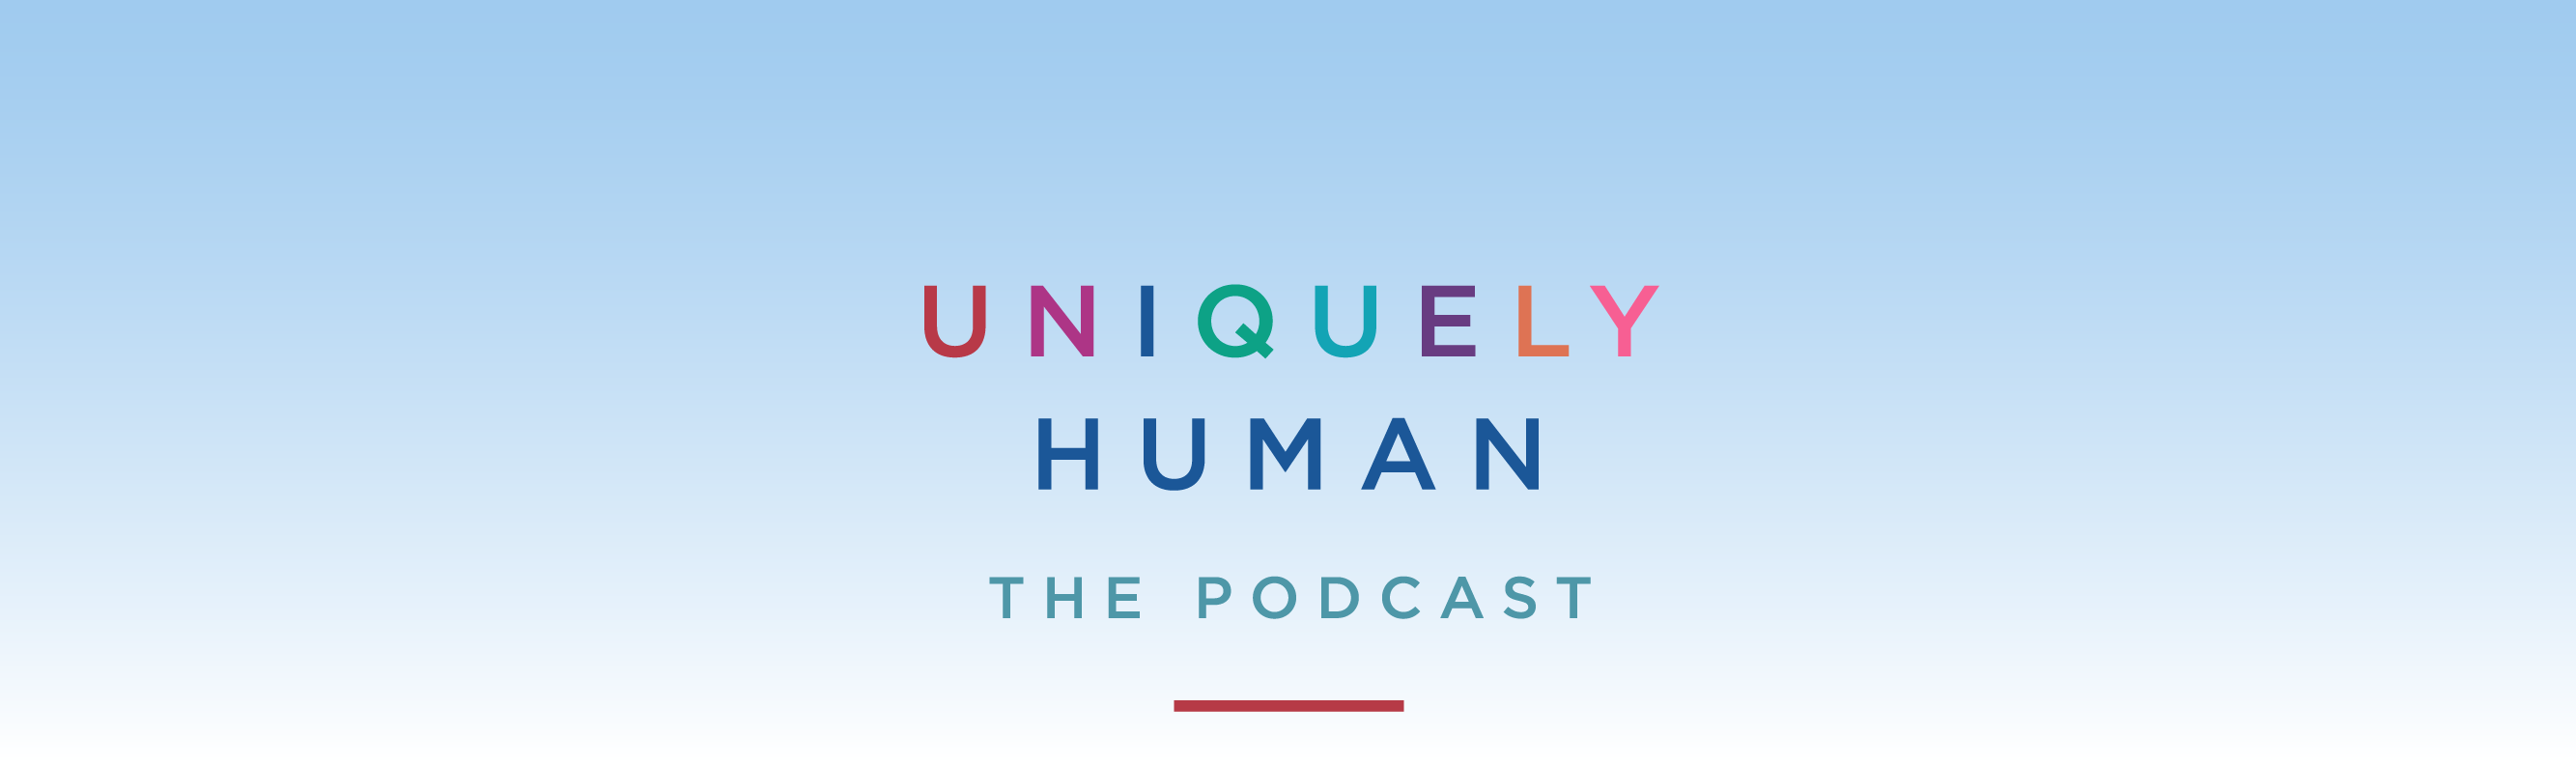 Uniquely Human The Podcast Header